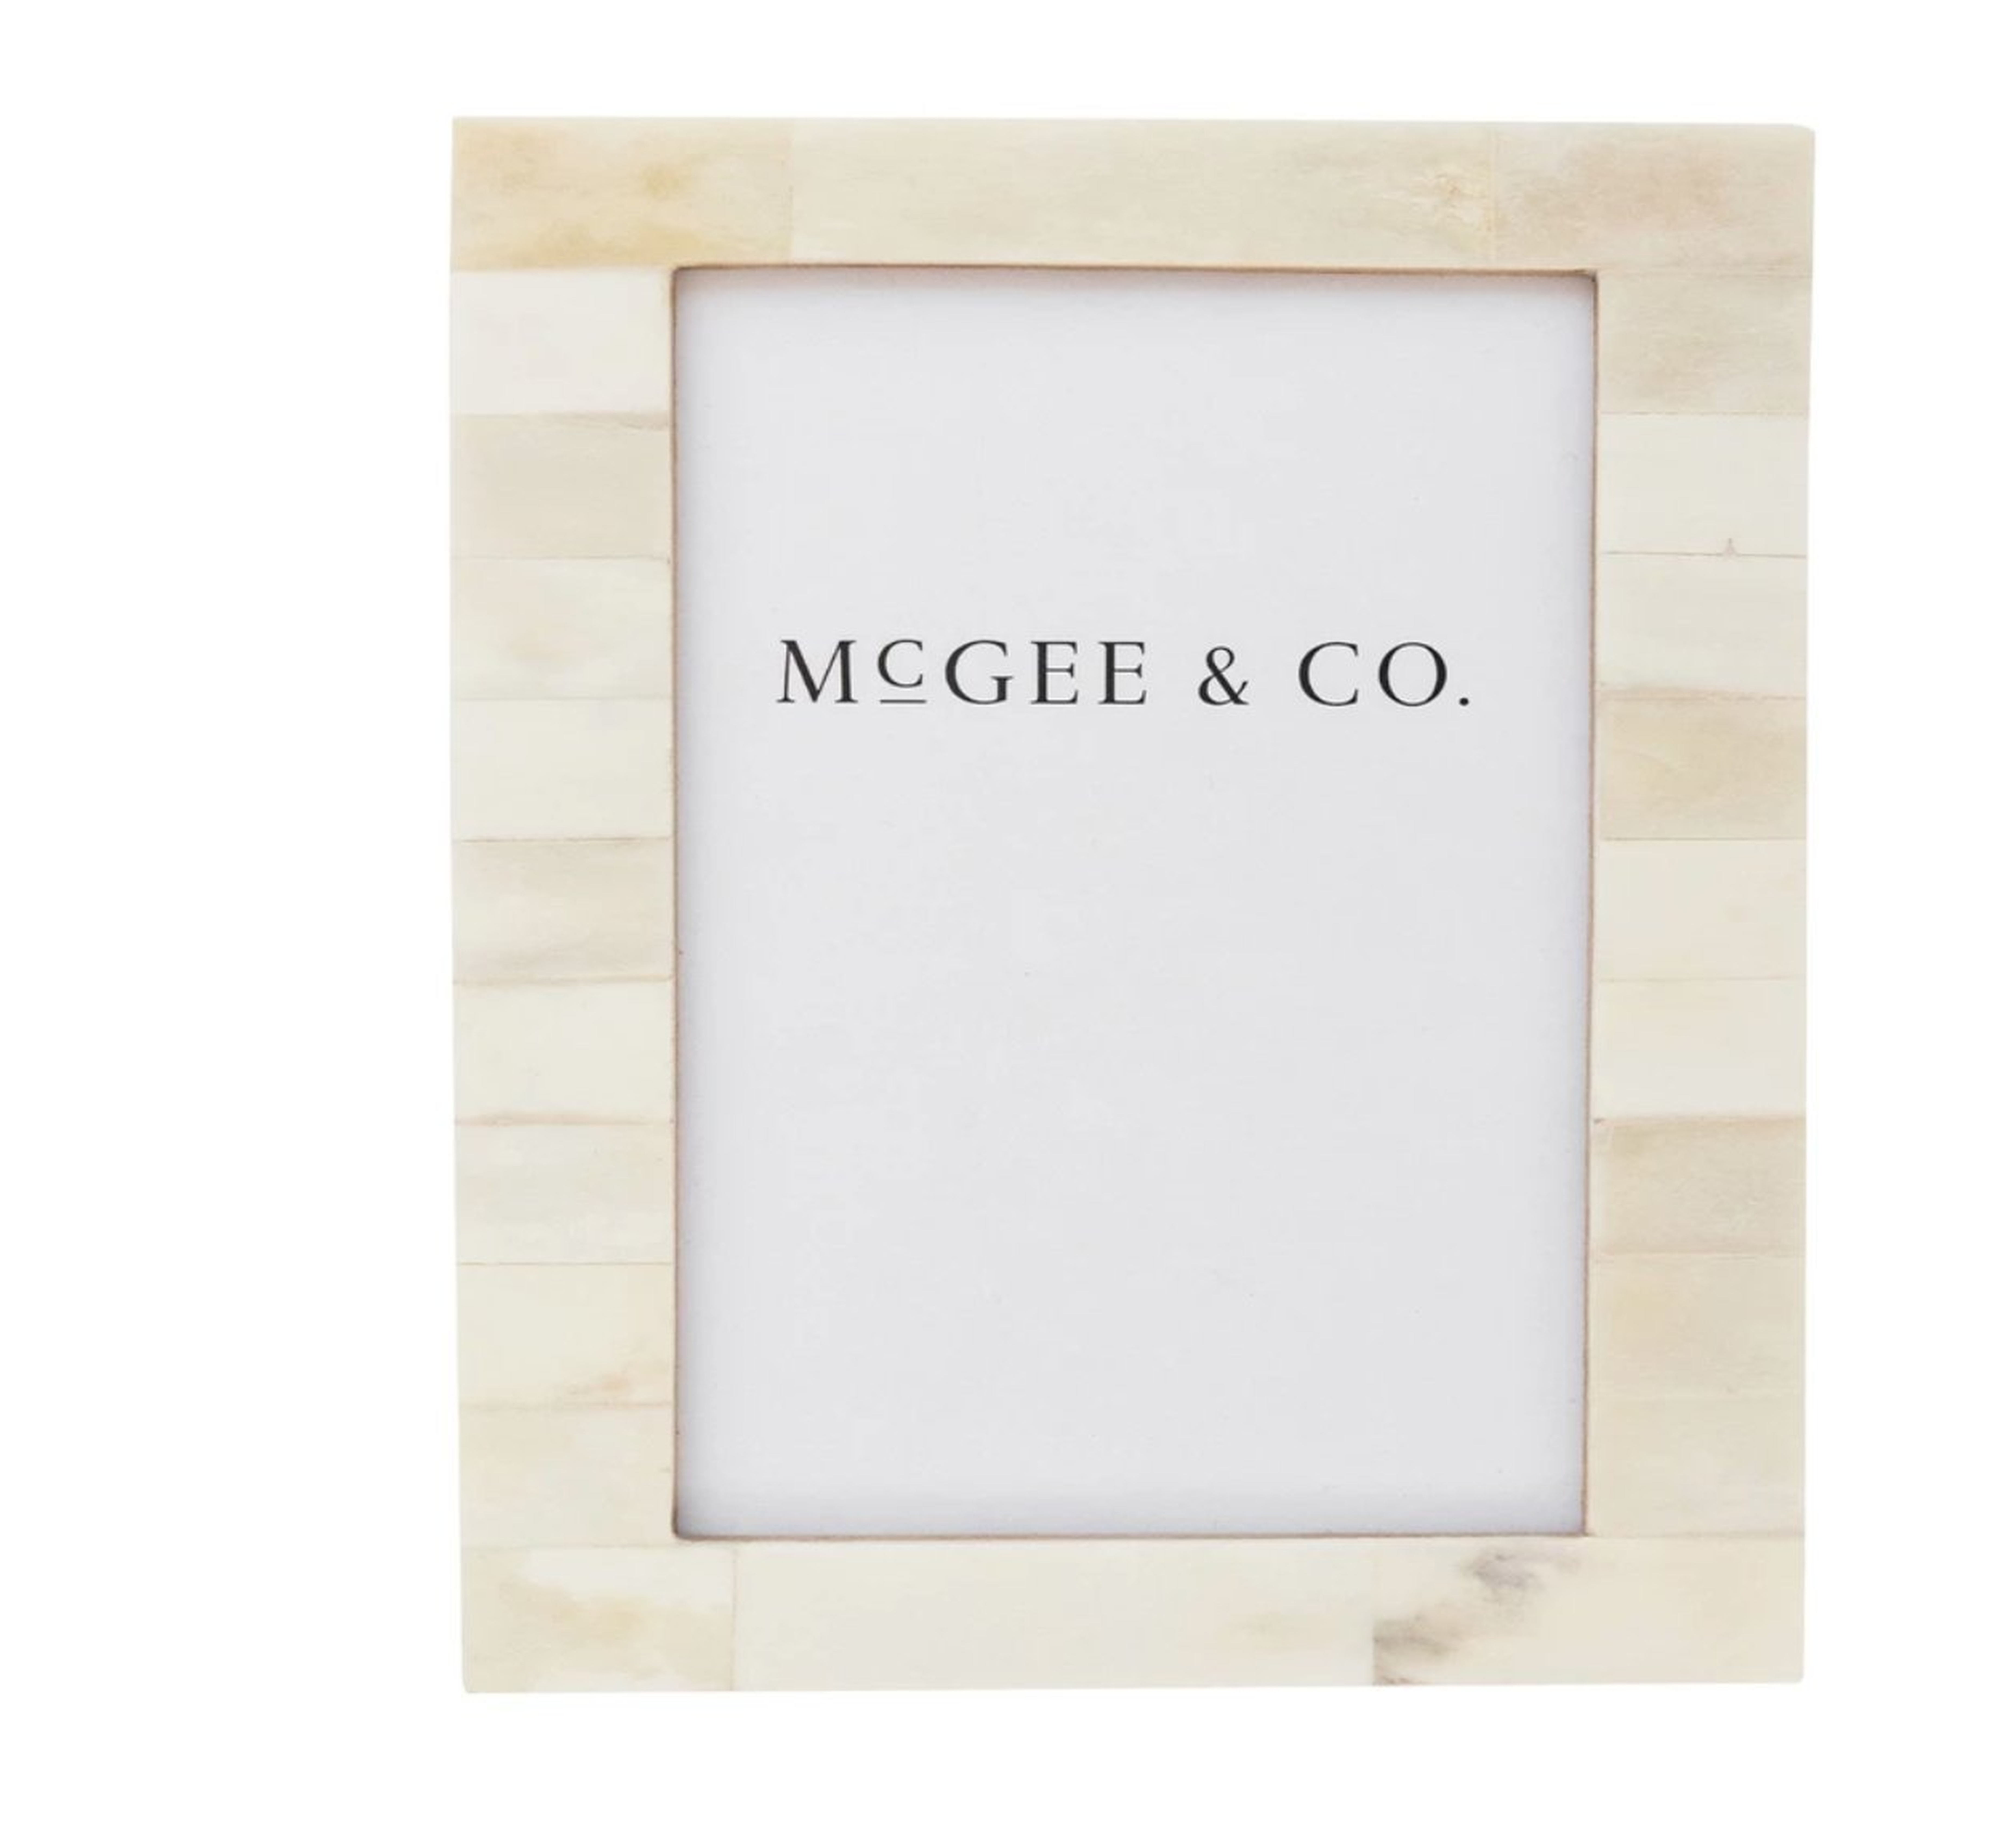 MIXED PEARL FRAME - McGee & Co.